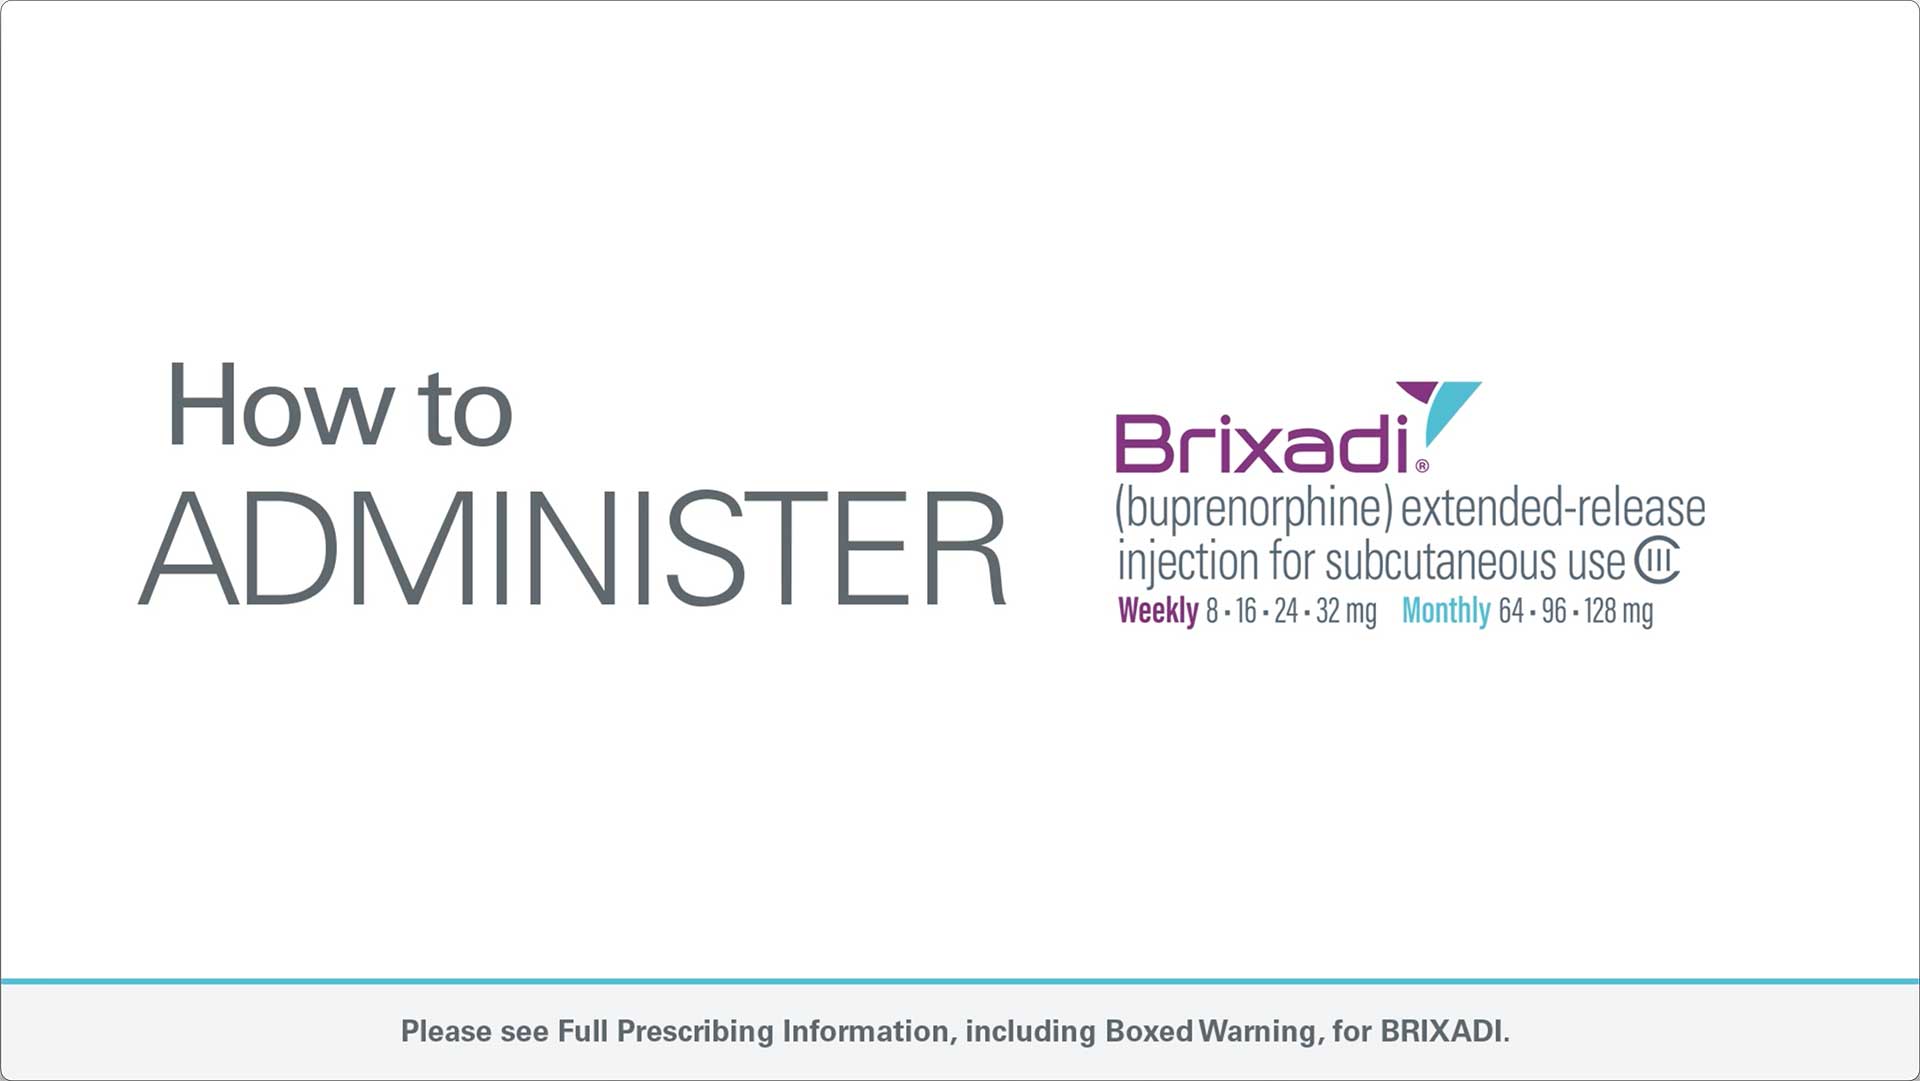 Video of how to administer BRIXADI